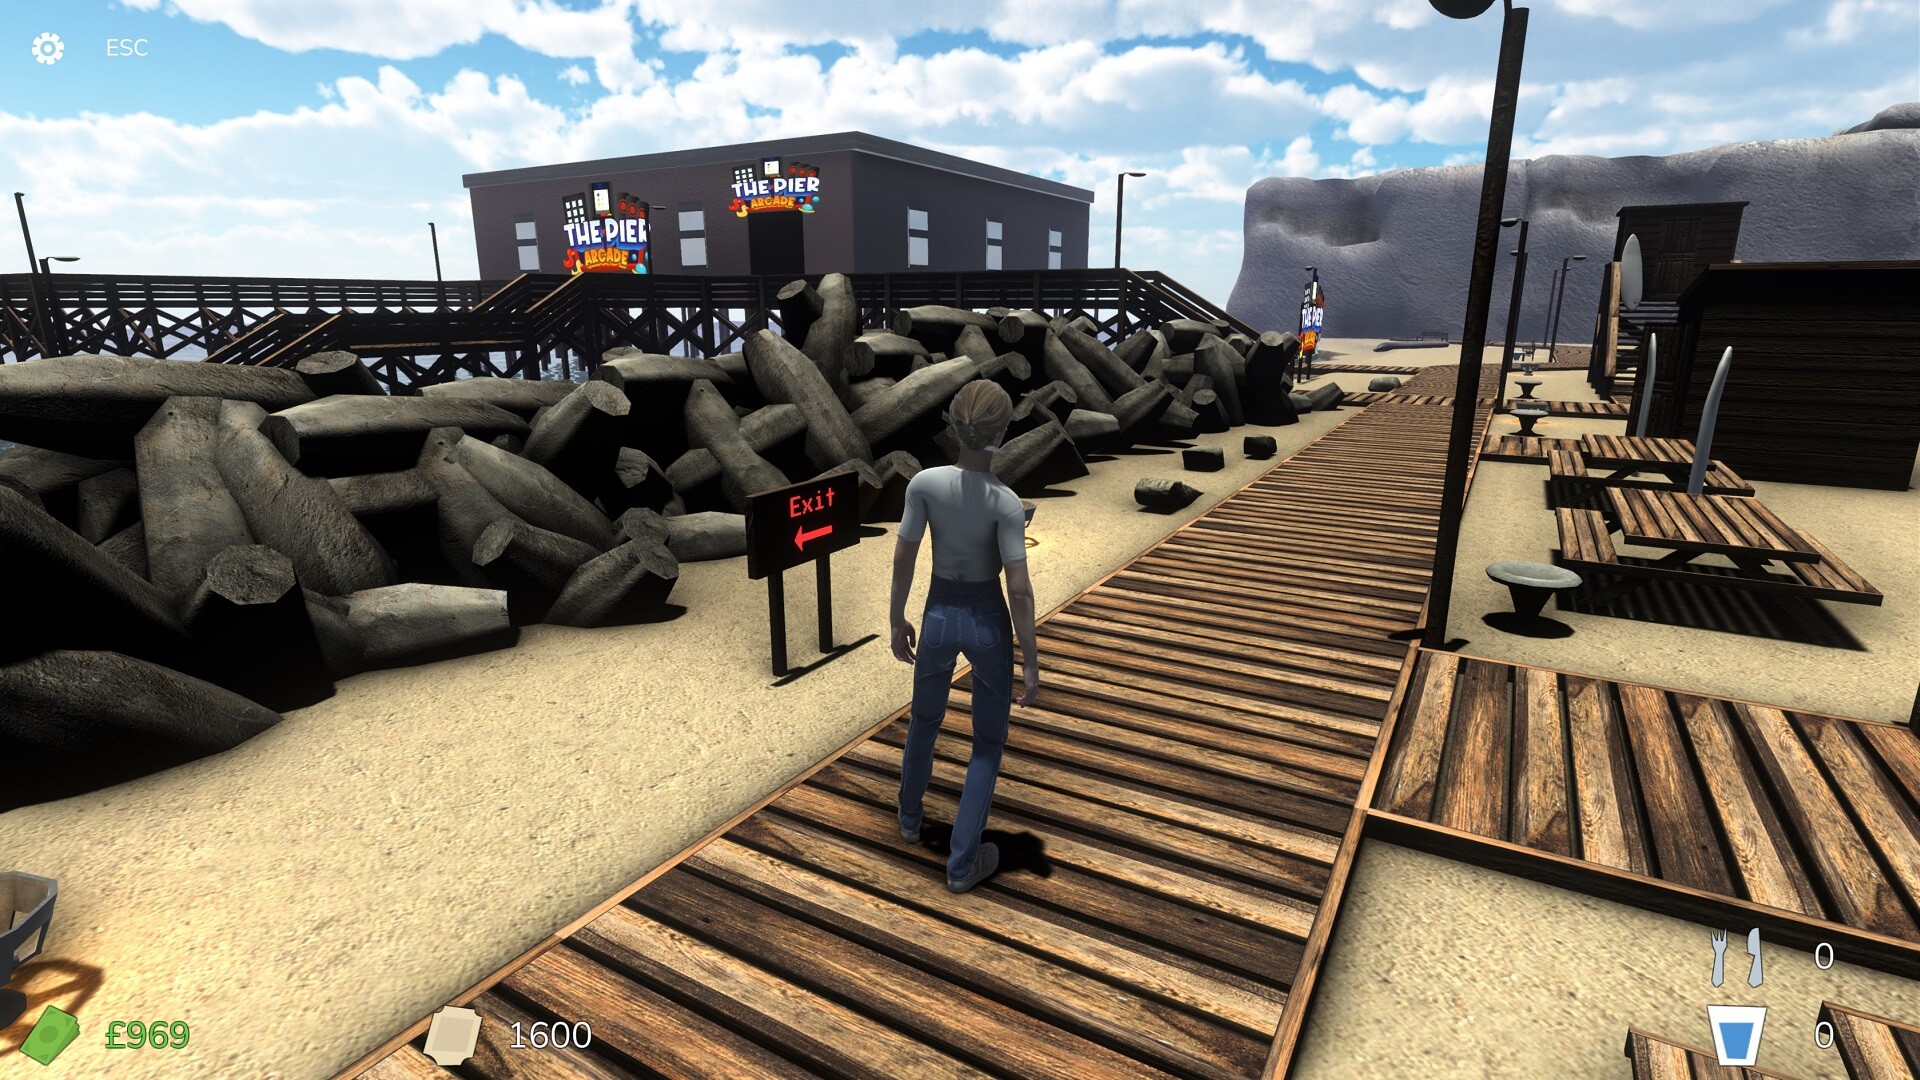 The Pier Arcade Free Download